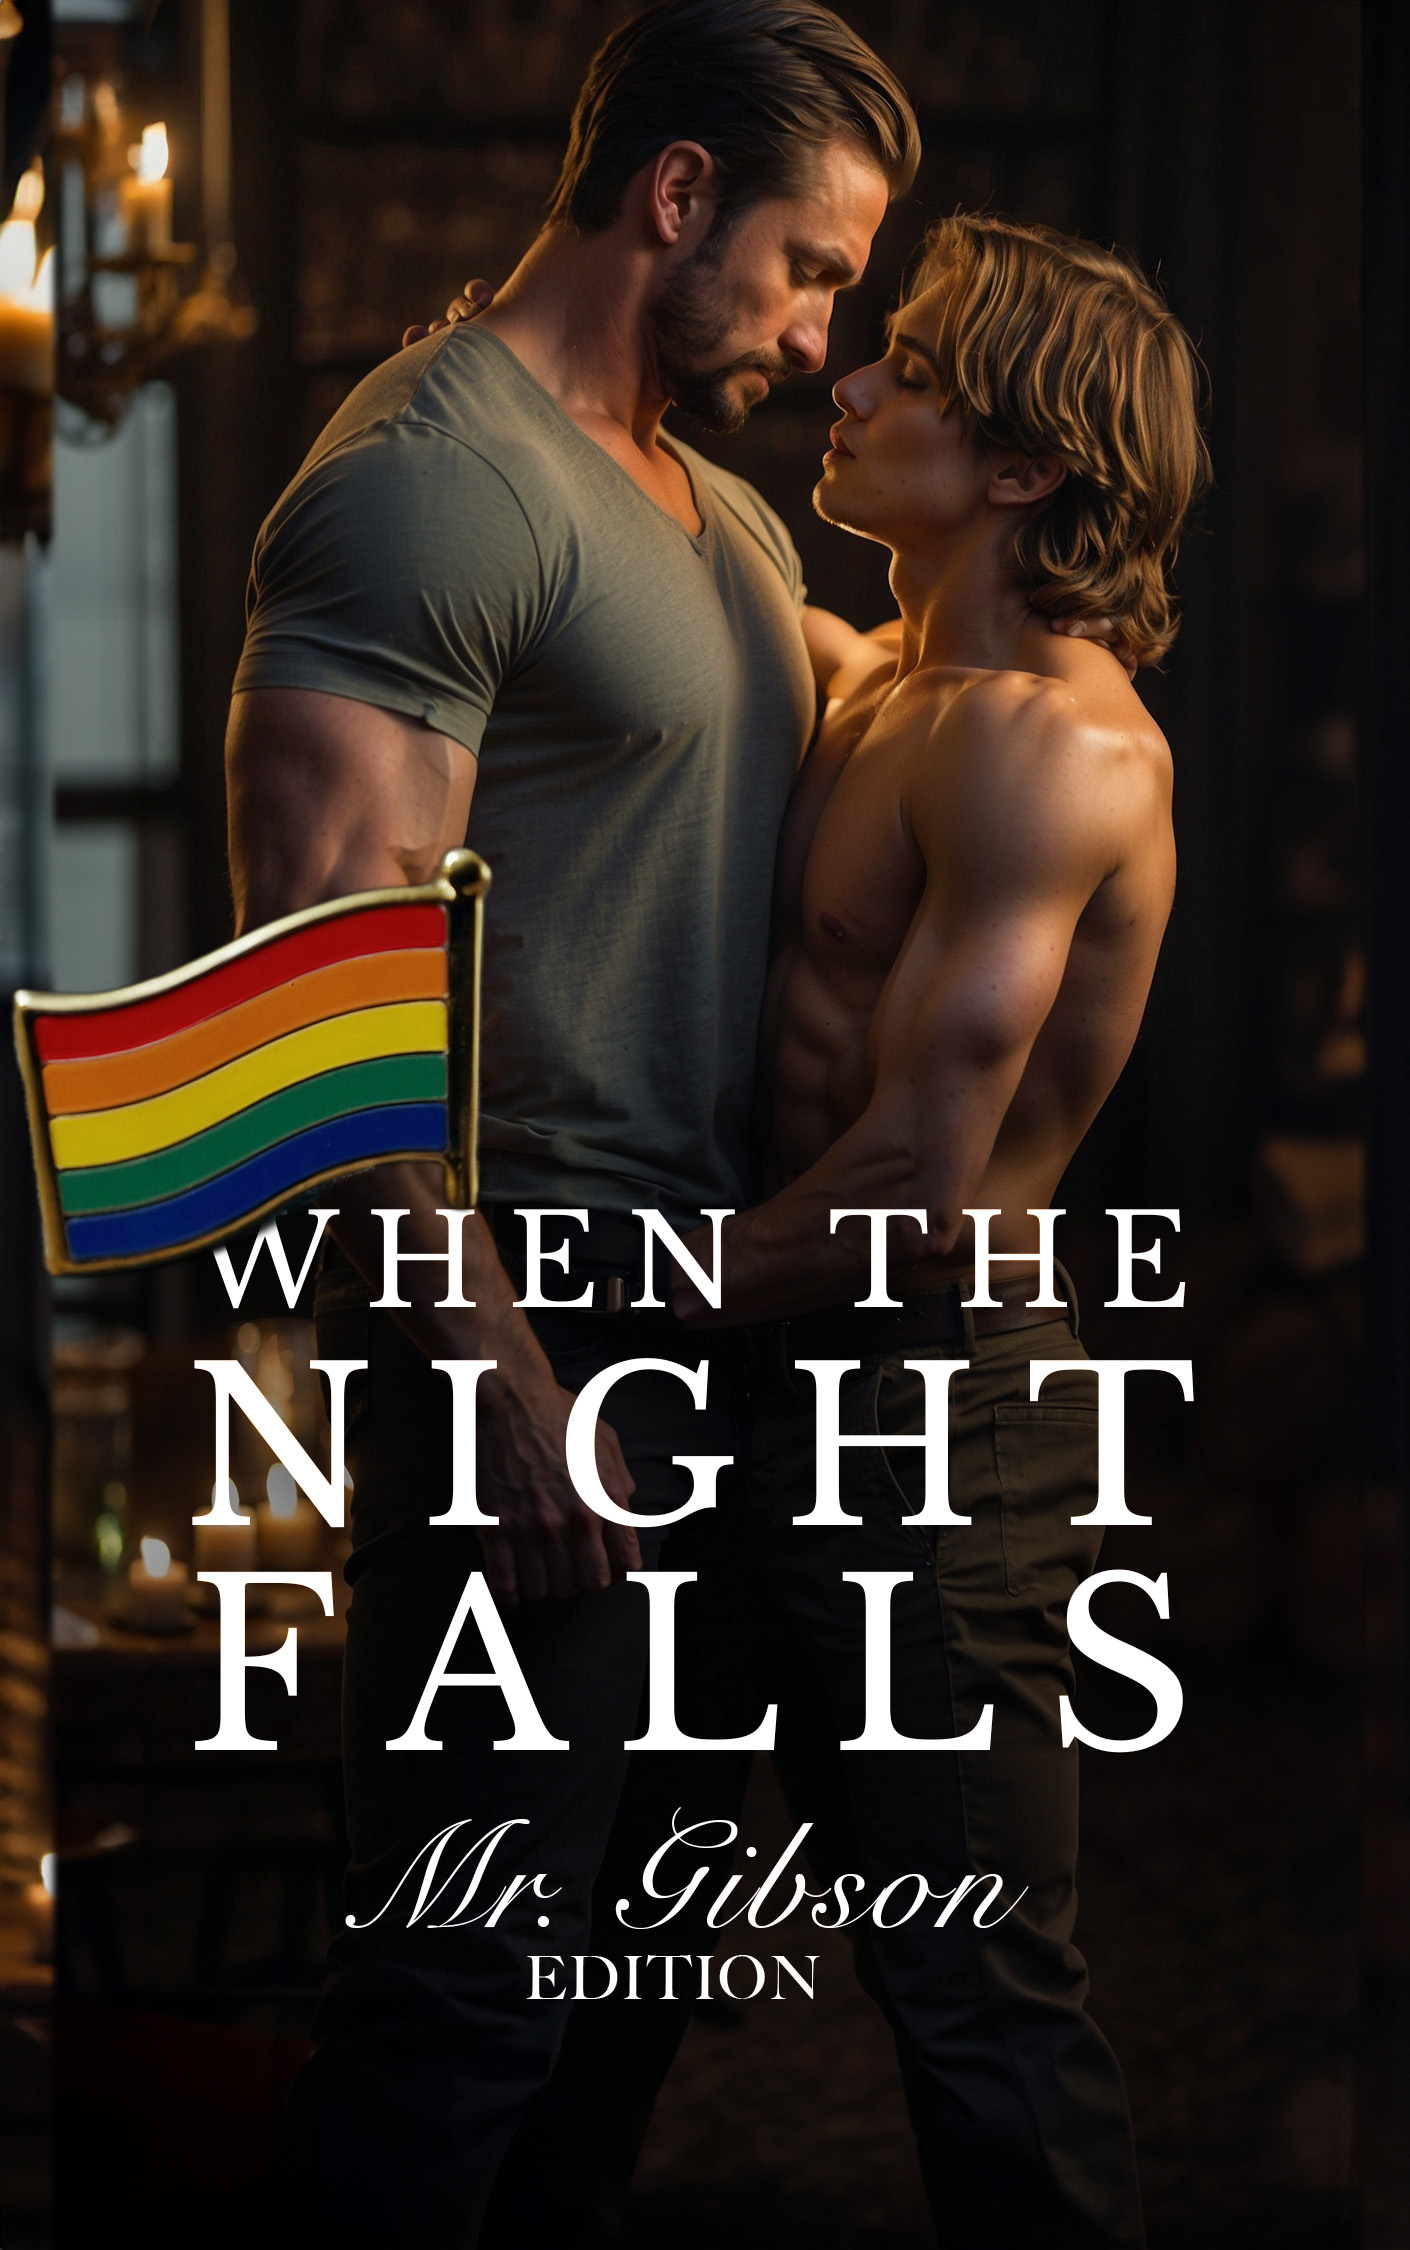 When the Night Falls: Mr. Gibson Edition - Book cover